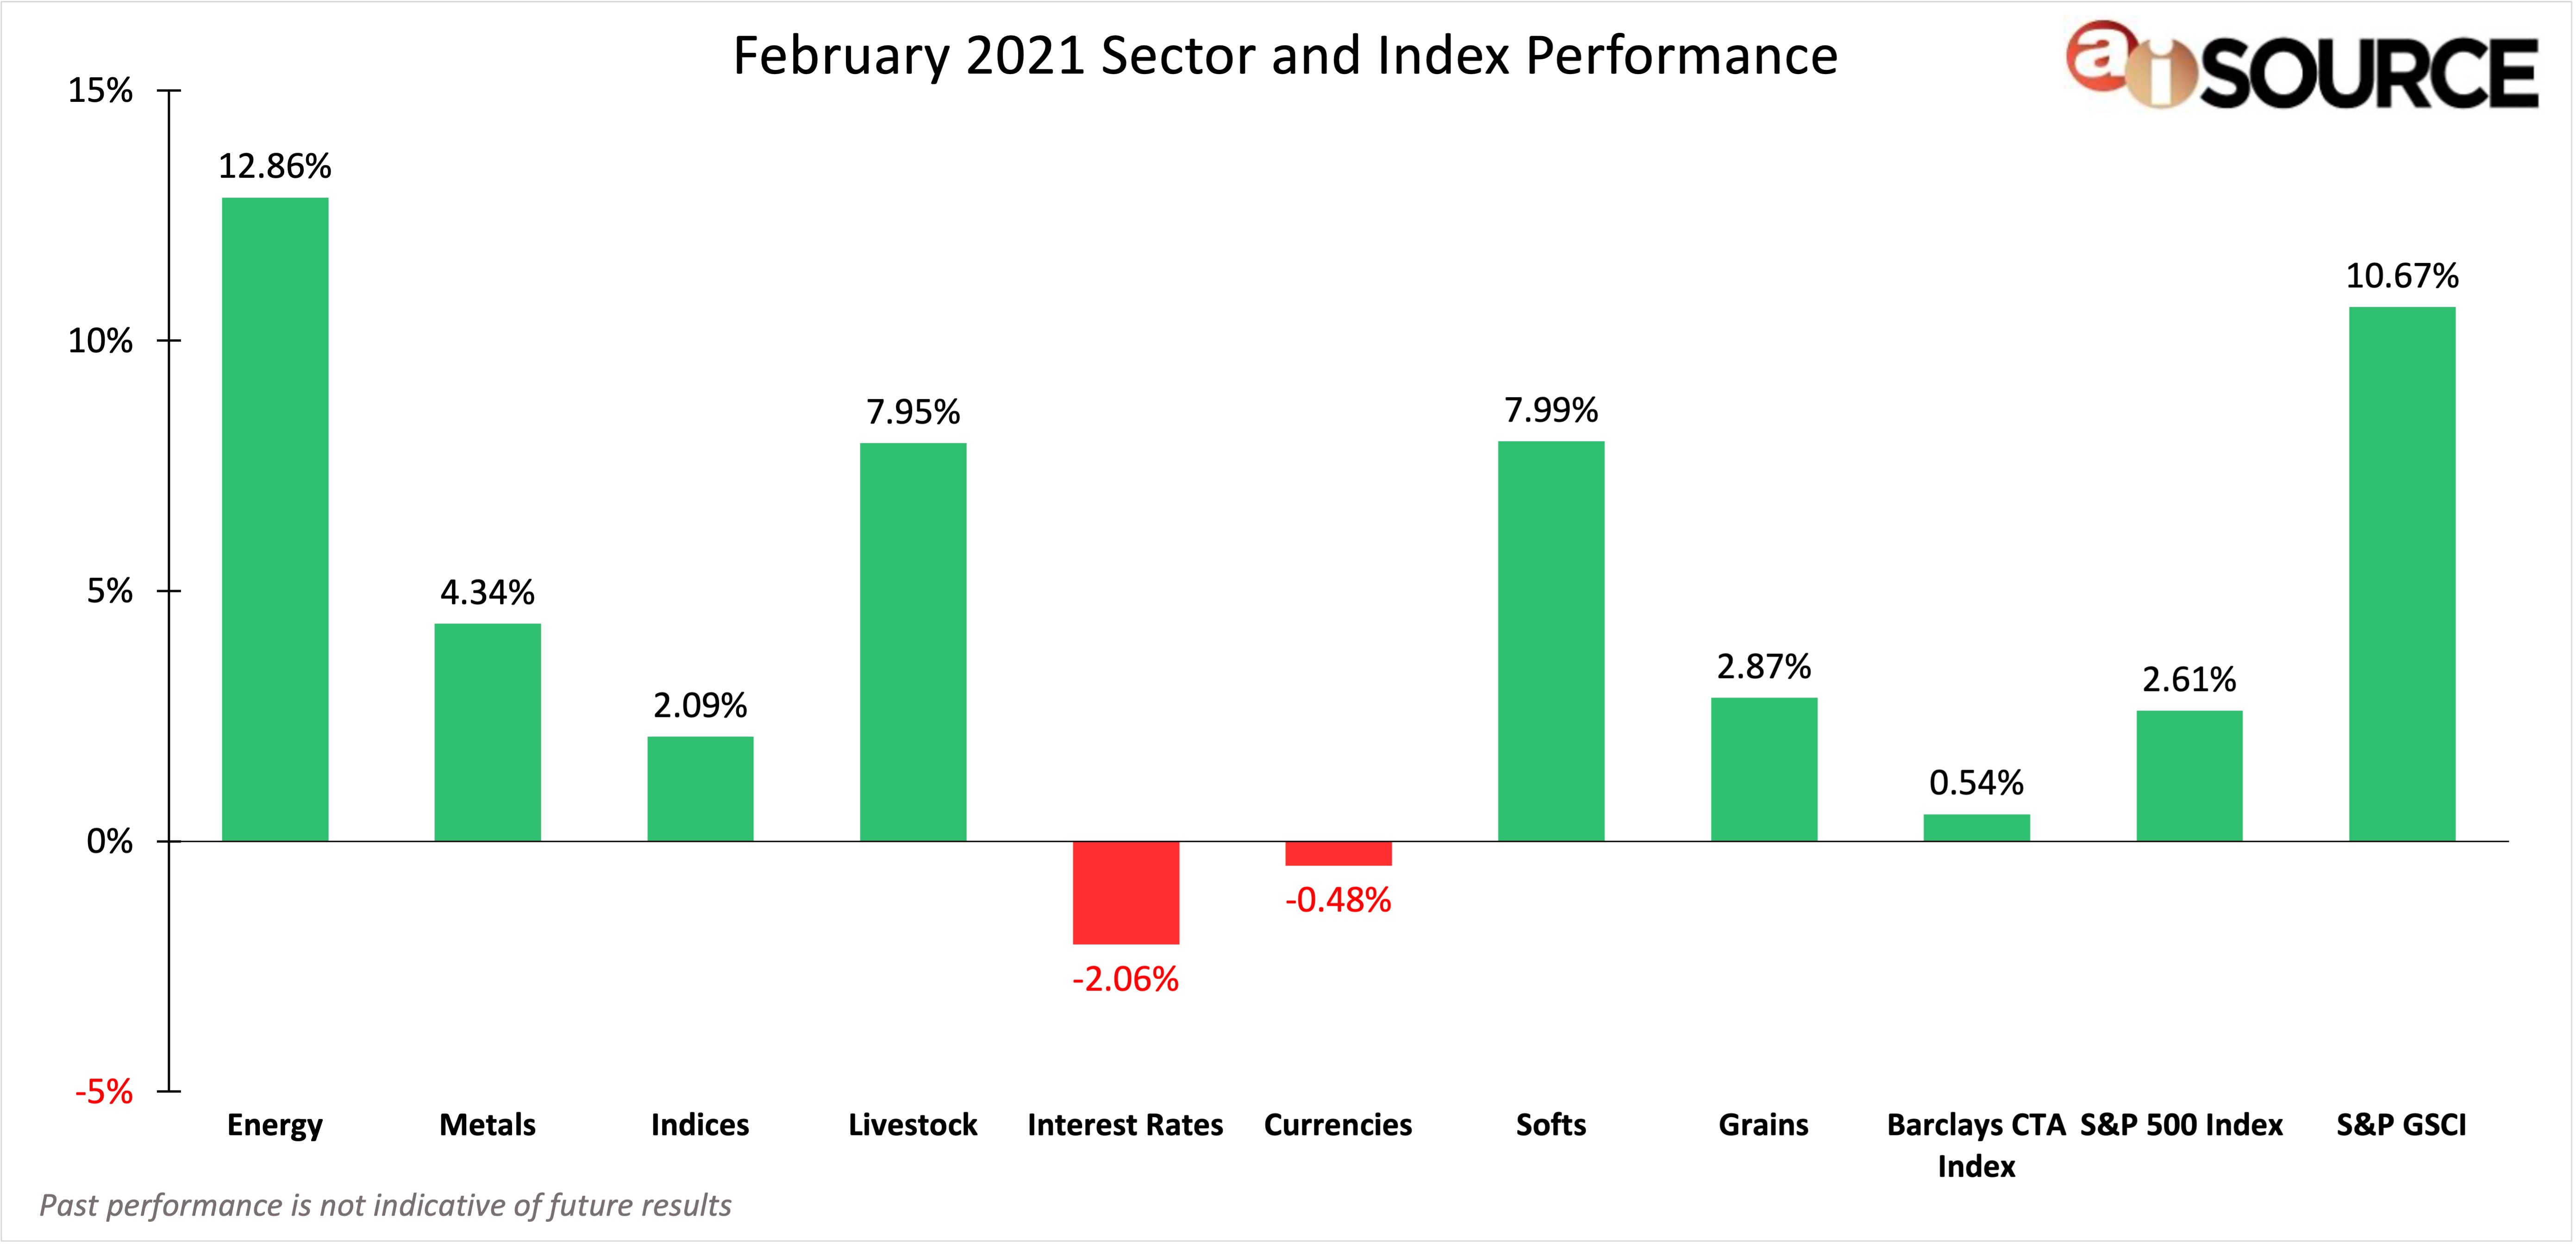 February 2021 Sector and Index Performance